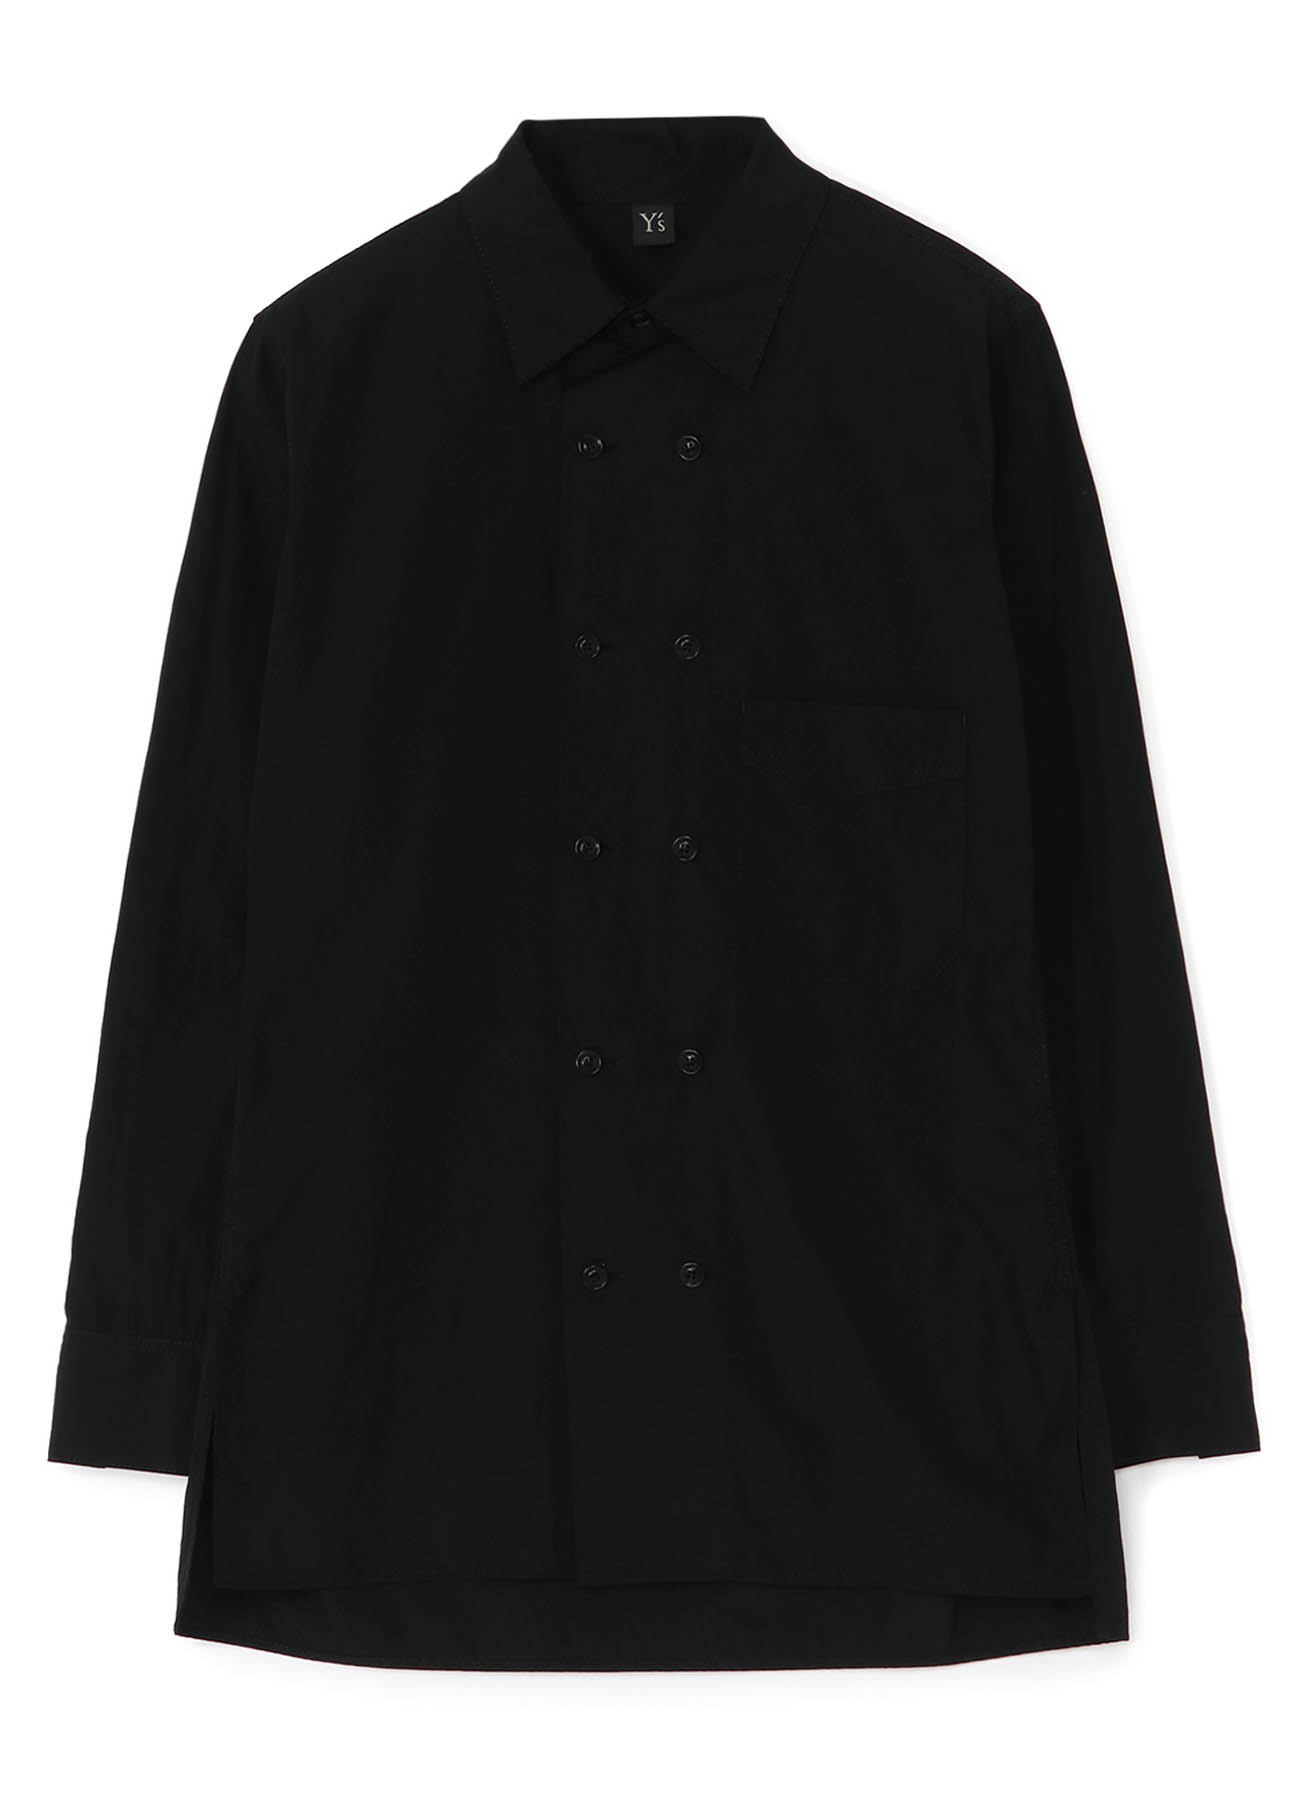 [Y's1972] PIGMENT PRINT BROAD FRONT DOUBLE SHIRT